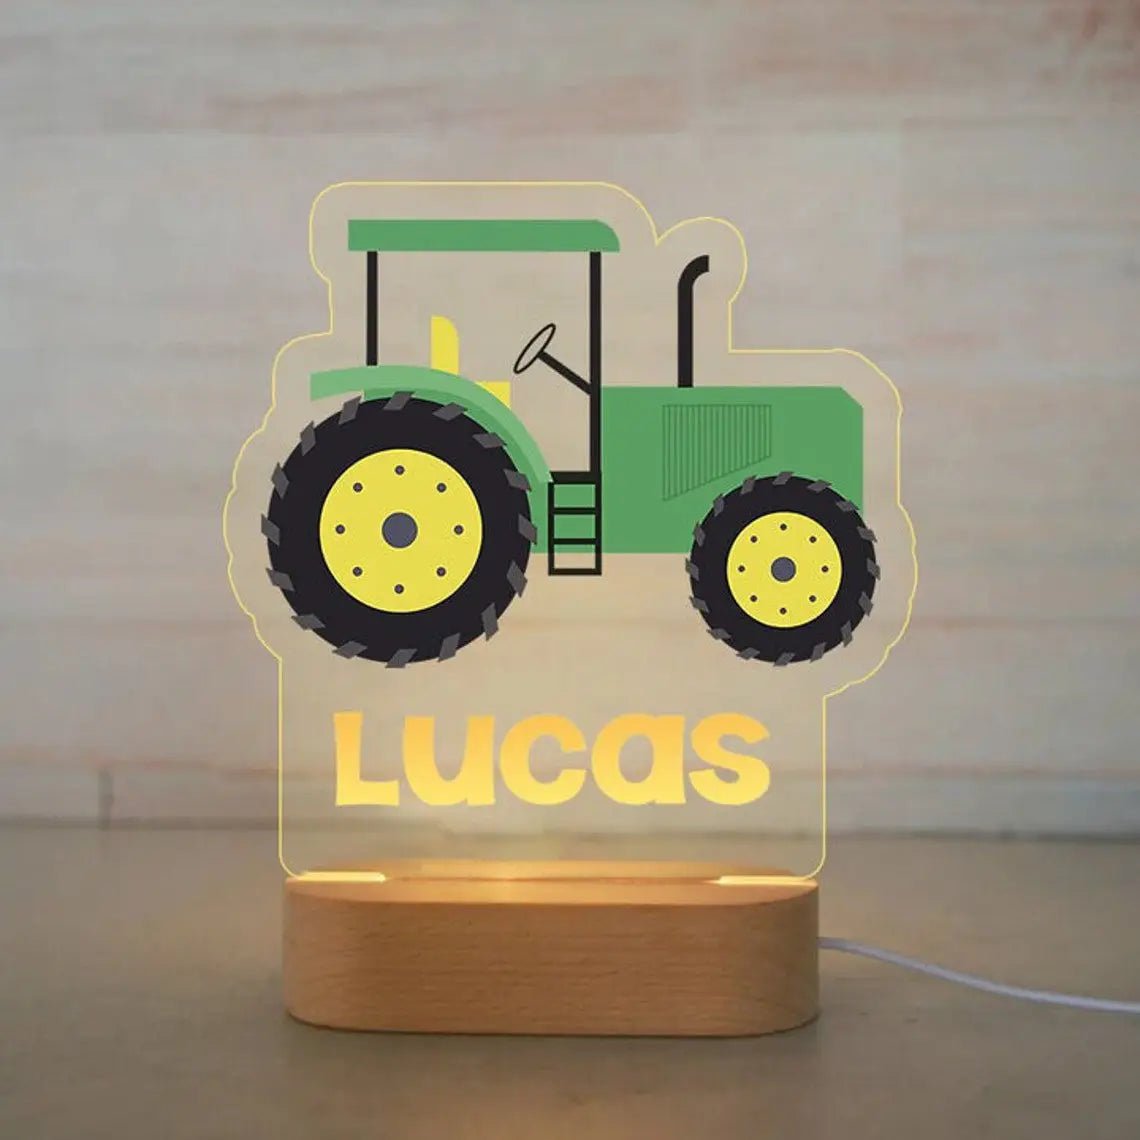 Customized Animal-themed Night Light for Kids - Personalized with Child's Name, Acrylic Lamp for Bedroom Decor Warm Light / 27Green Truck